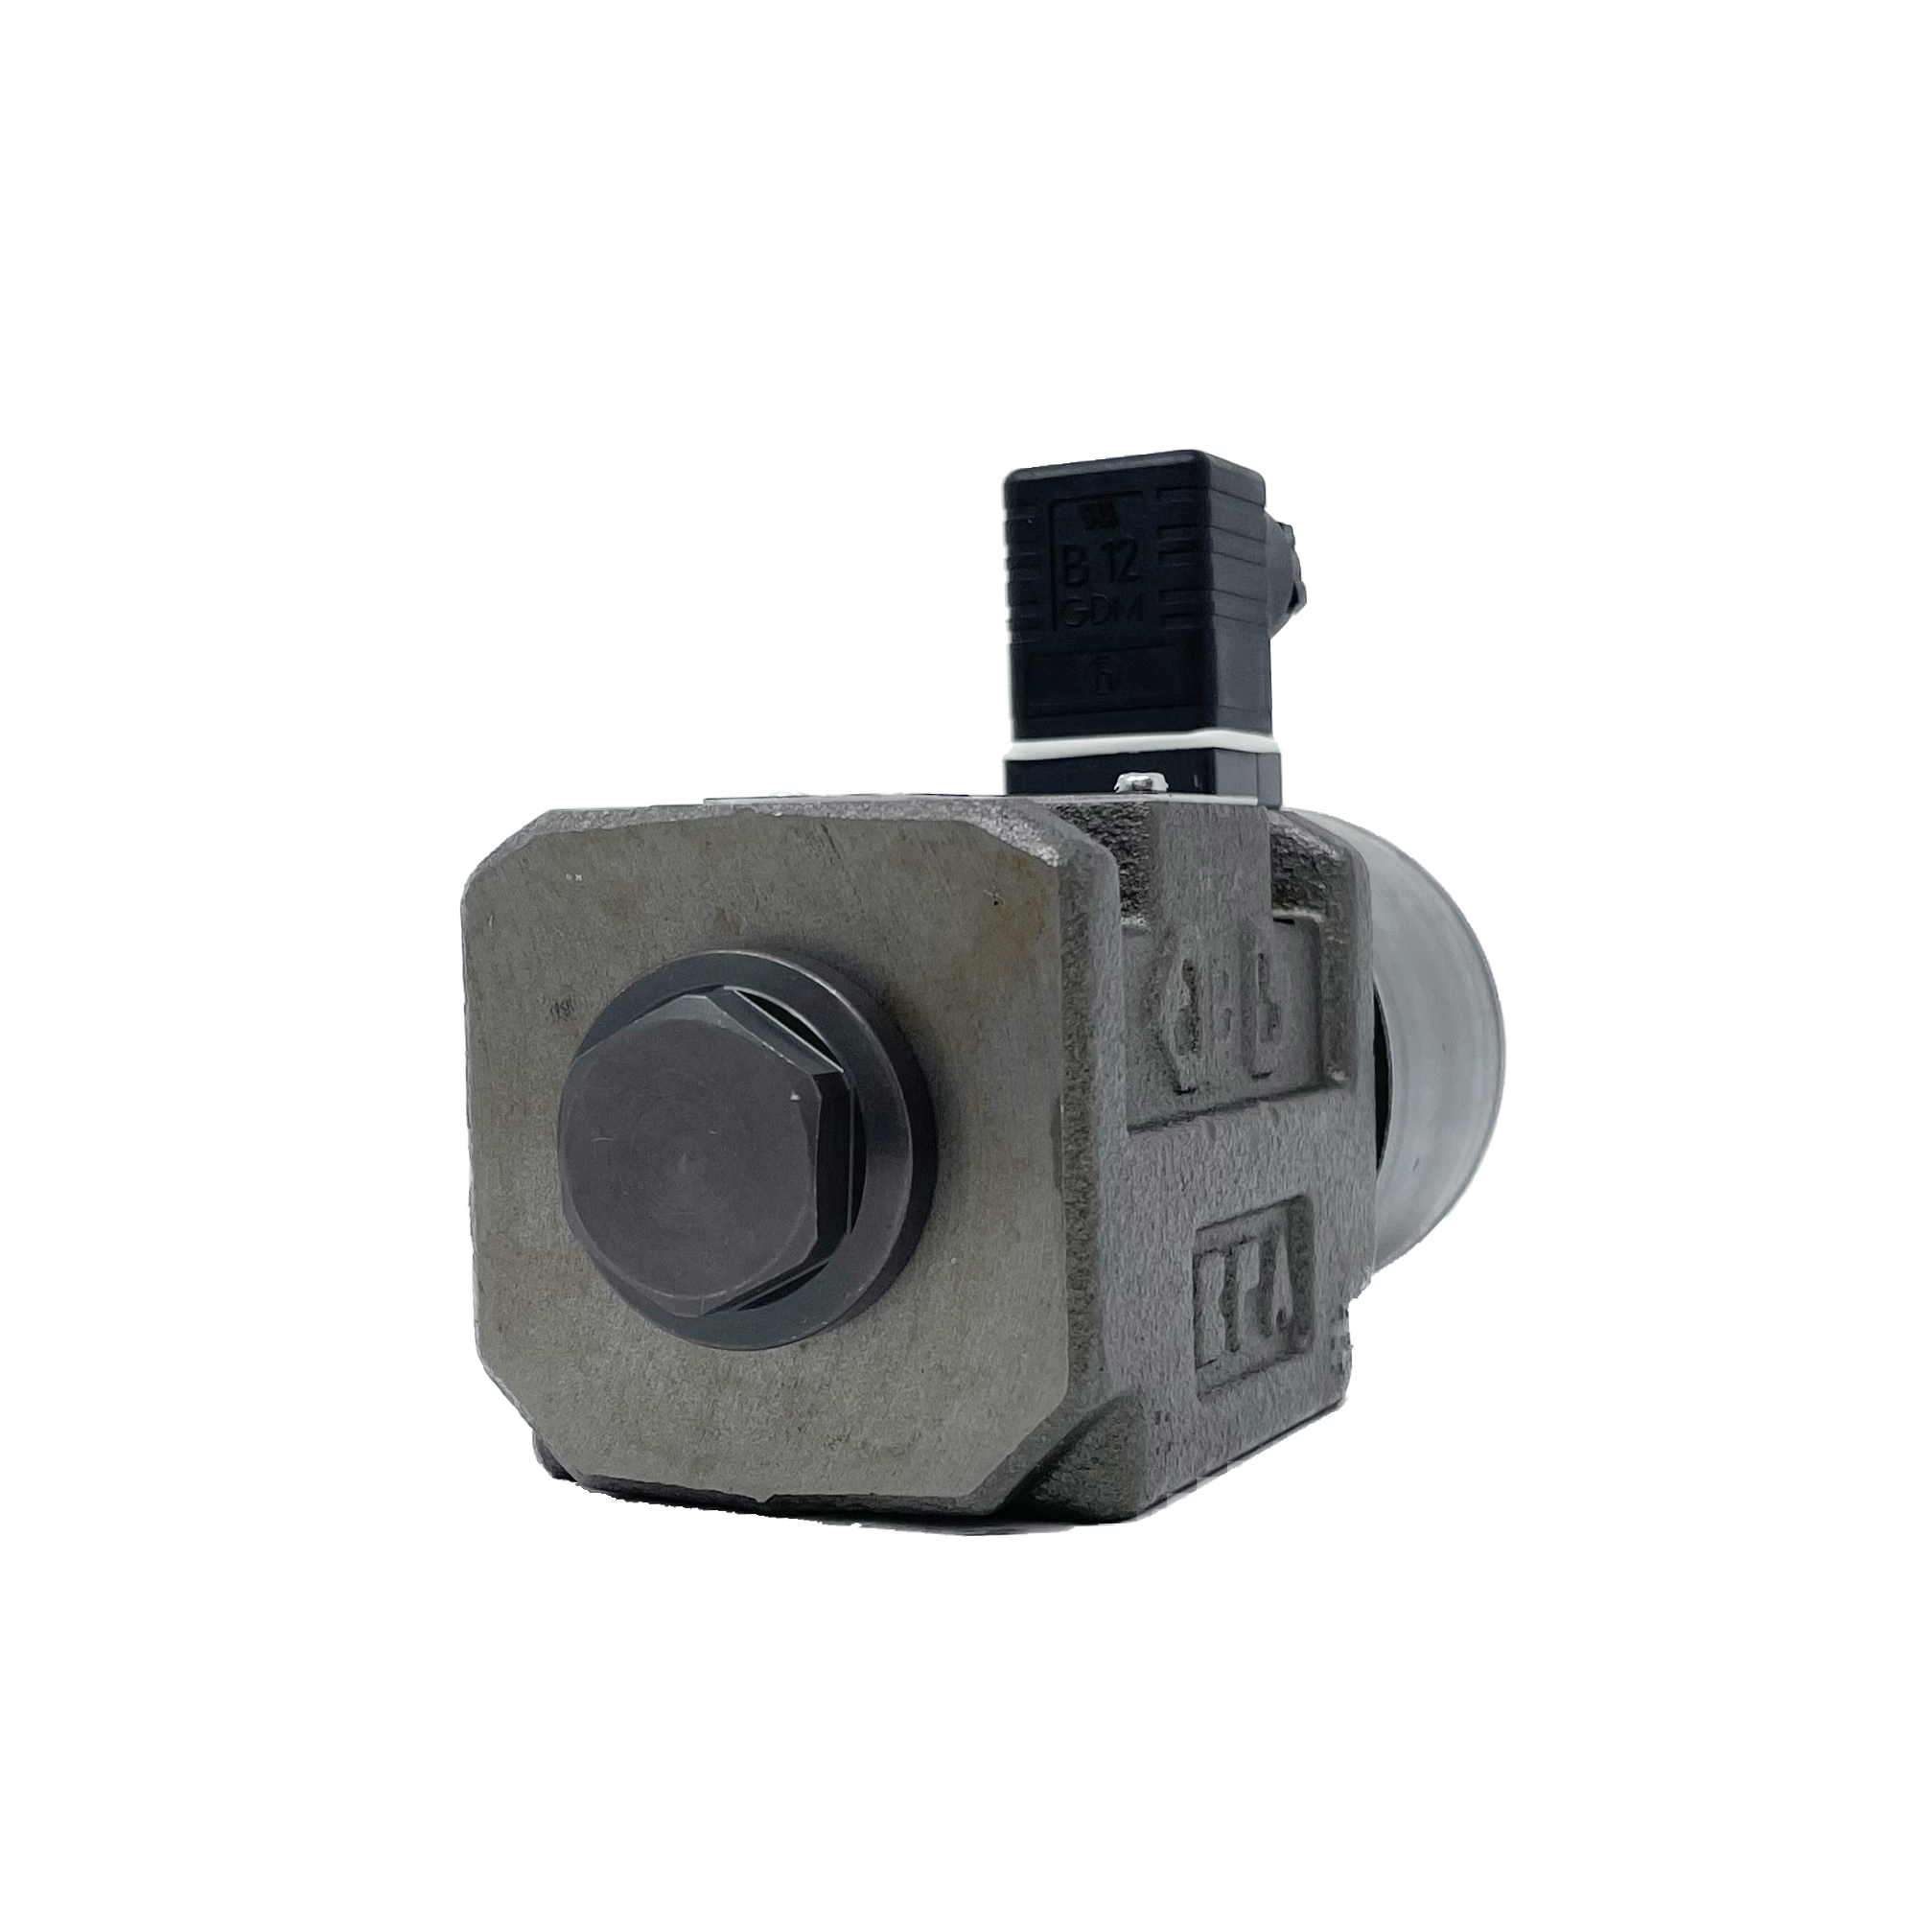 SA-G03-A3Z-C115-E21 : Nachi Solenoid Valve, 3P4W, D05 (NG10), 34.3GPM, 5075psi, P to A, B to T in Neutral, 110 VAC, DIN